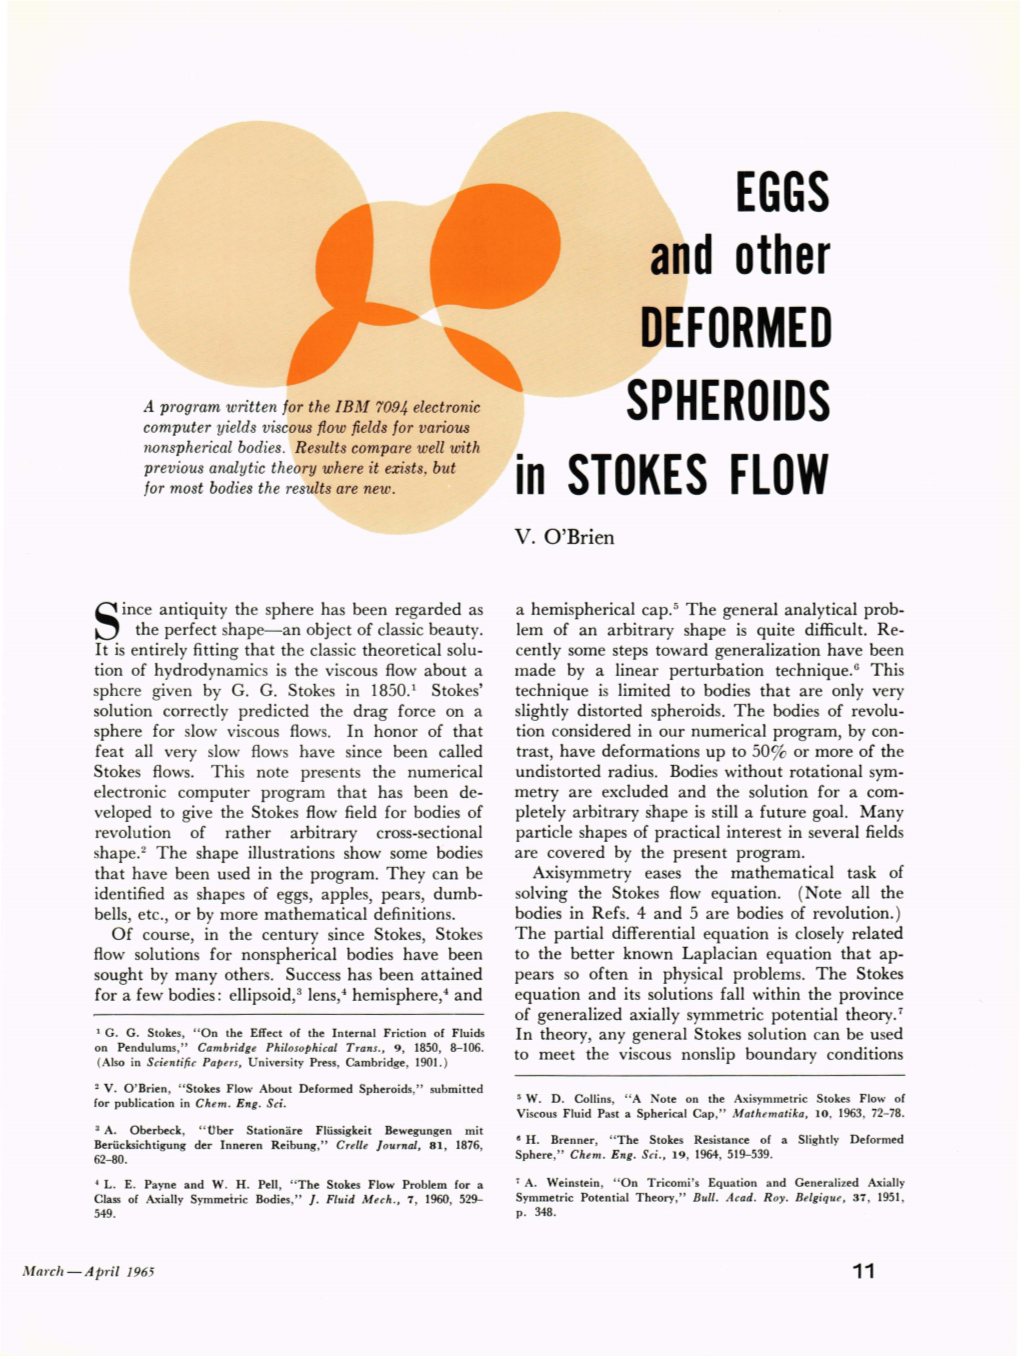 Eggs and Other Deformed Spheroids in Stokes Flow